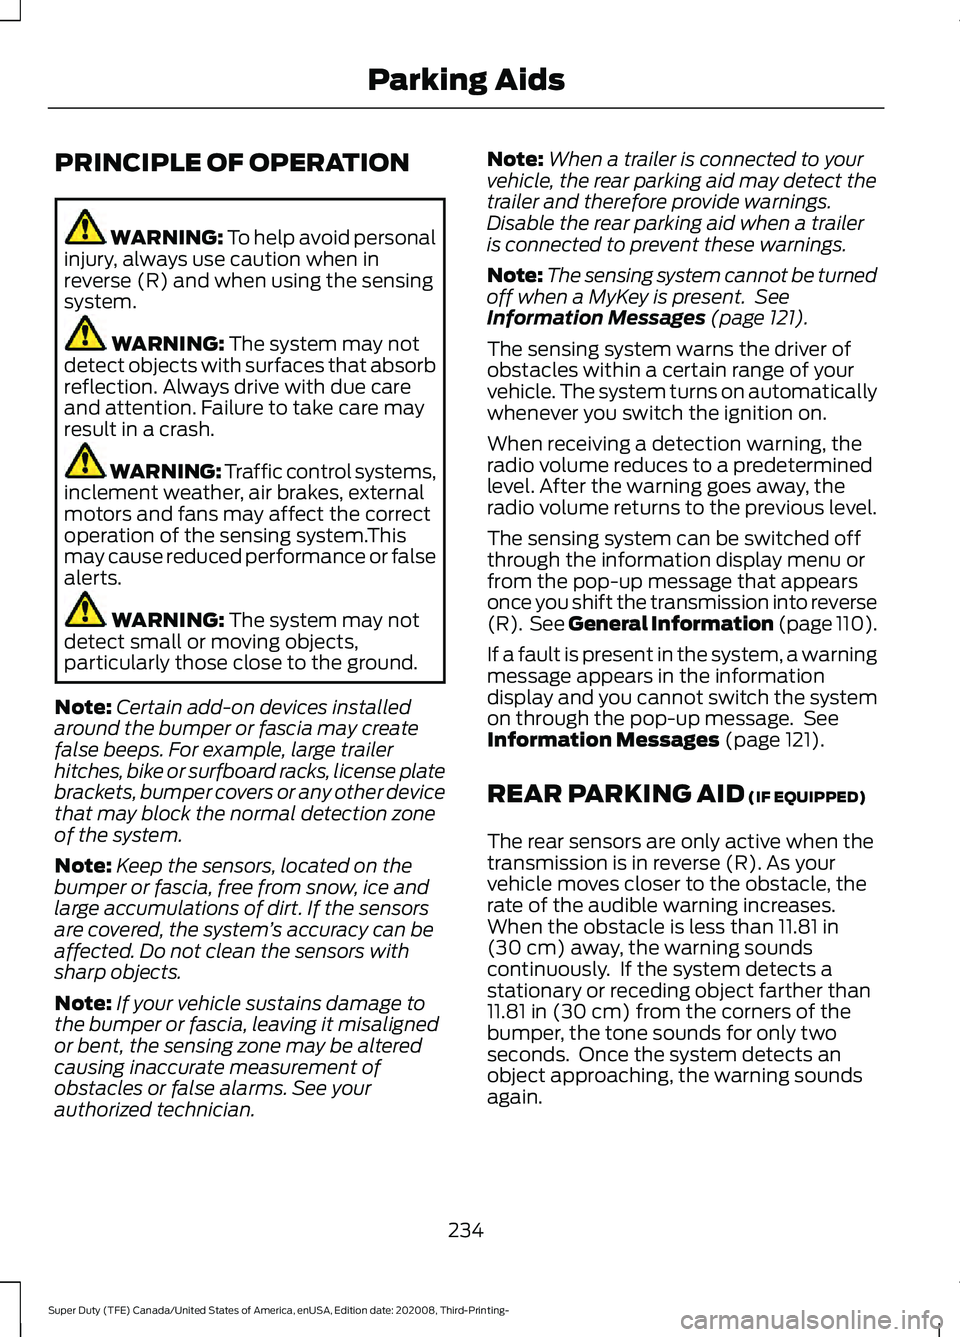 FORD F-350 2021  Owners Manual PRINCIPLE OF OPERATION
WARNING: To help avoid personal
injury, always use caution when in
reverse (R) and when using the sensing
system. WARNING: 
The system may not
detect objects with surfaces that 